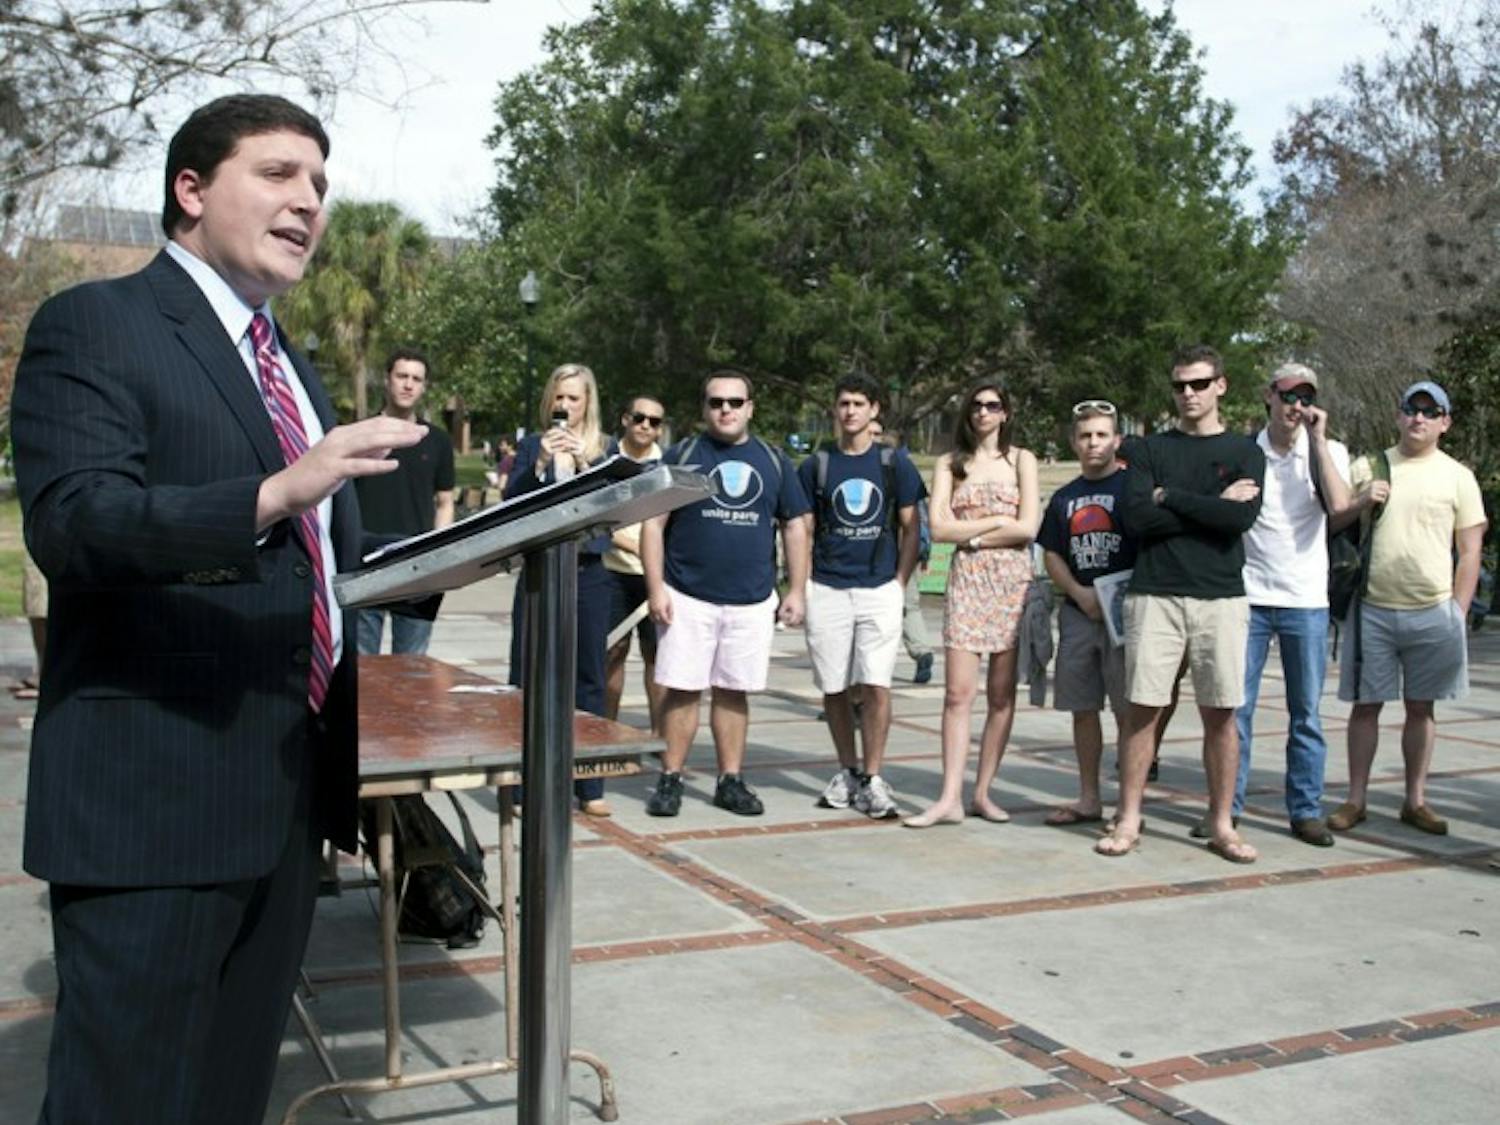 T.J. Villamil, presidential candidate for the Unite Party, speaks outside the Reitz Union on Wednesday afternoon.